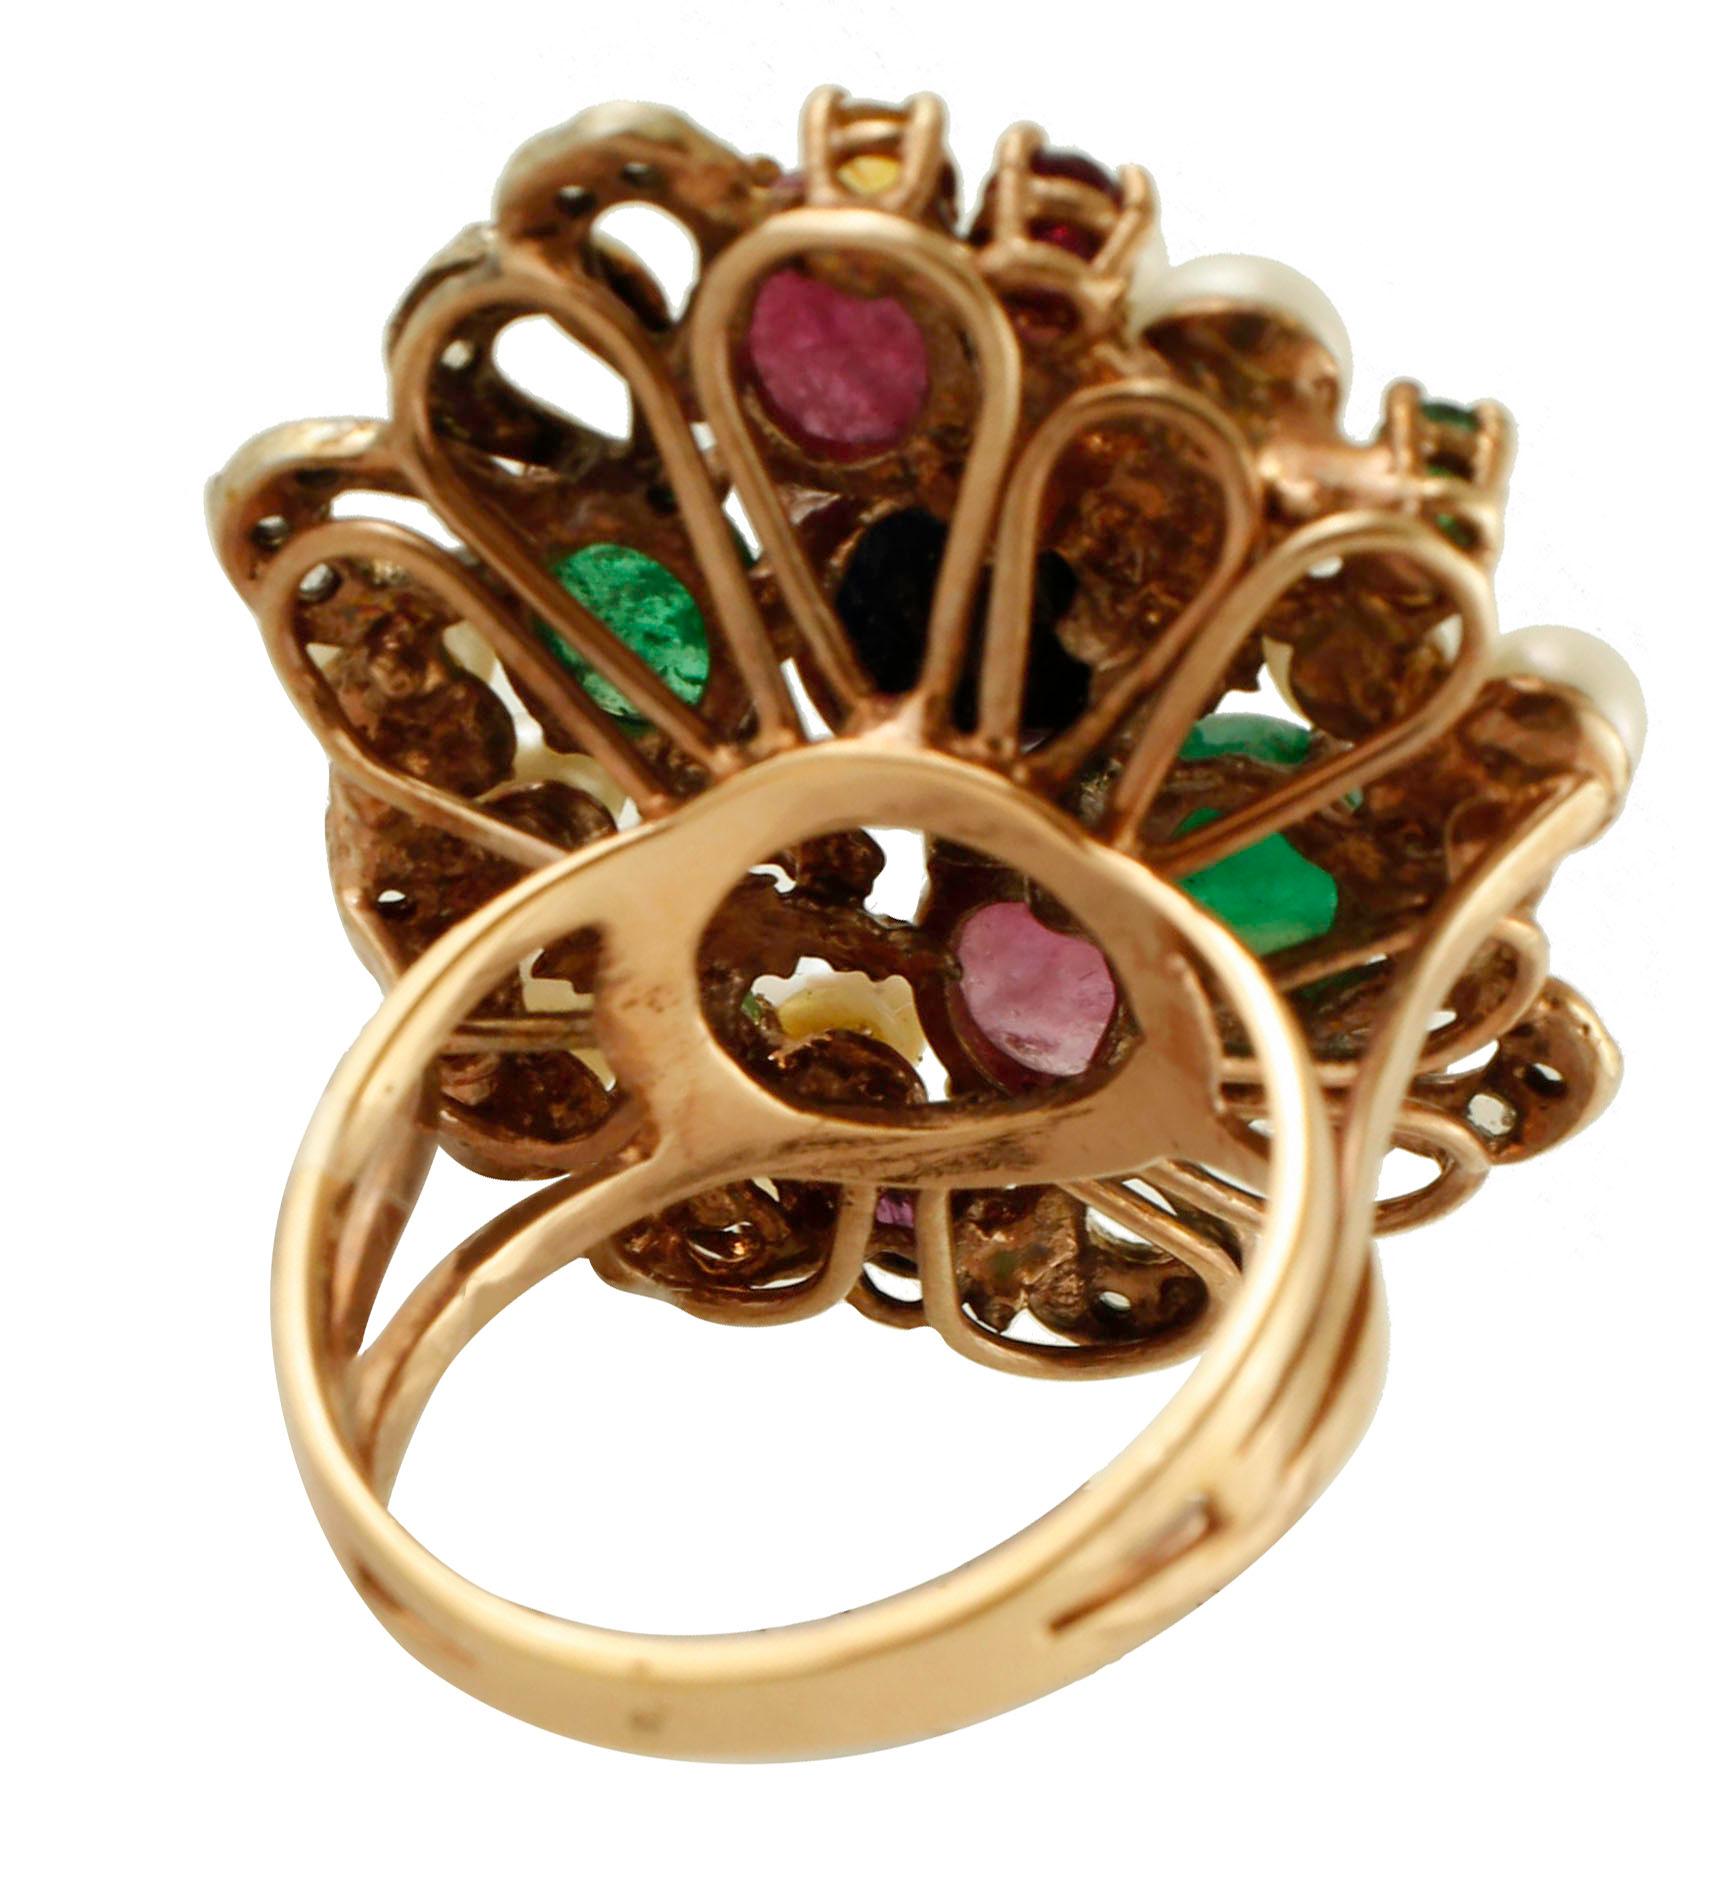 Retro Diamonds, Emeralds, Rubies, Sapphires, Pearls, 9 Karat Rose Gold and Silver Ring For Sale